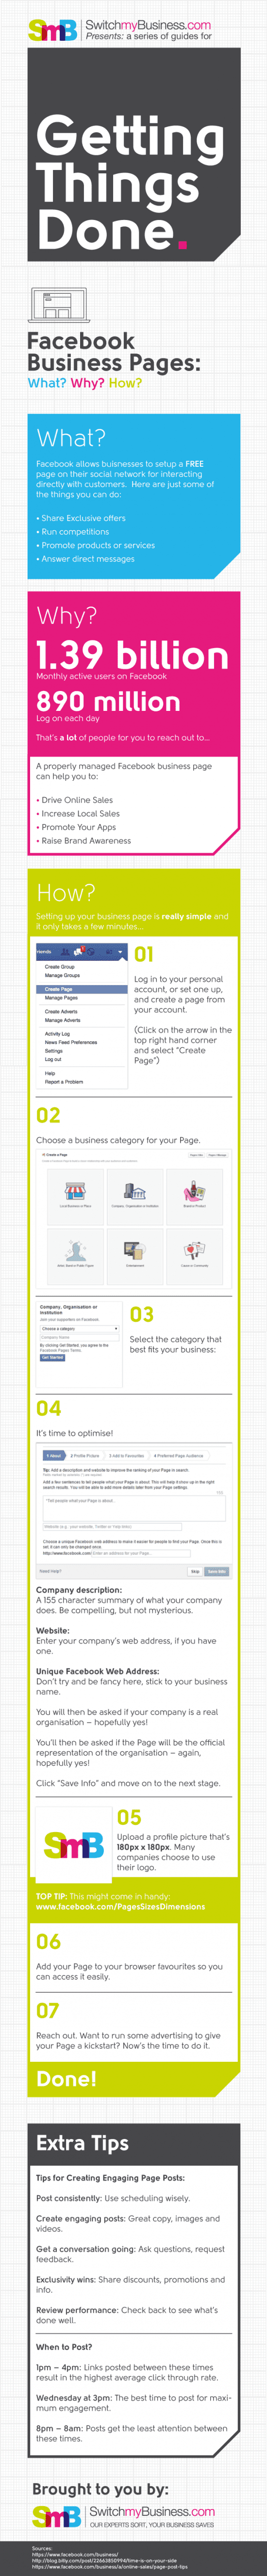 Getting Started with Facebook for Business 